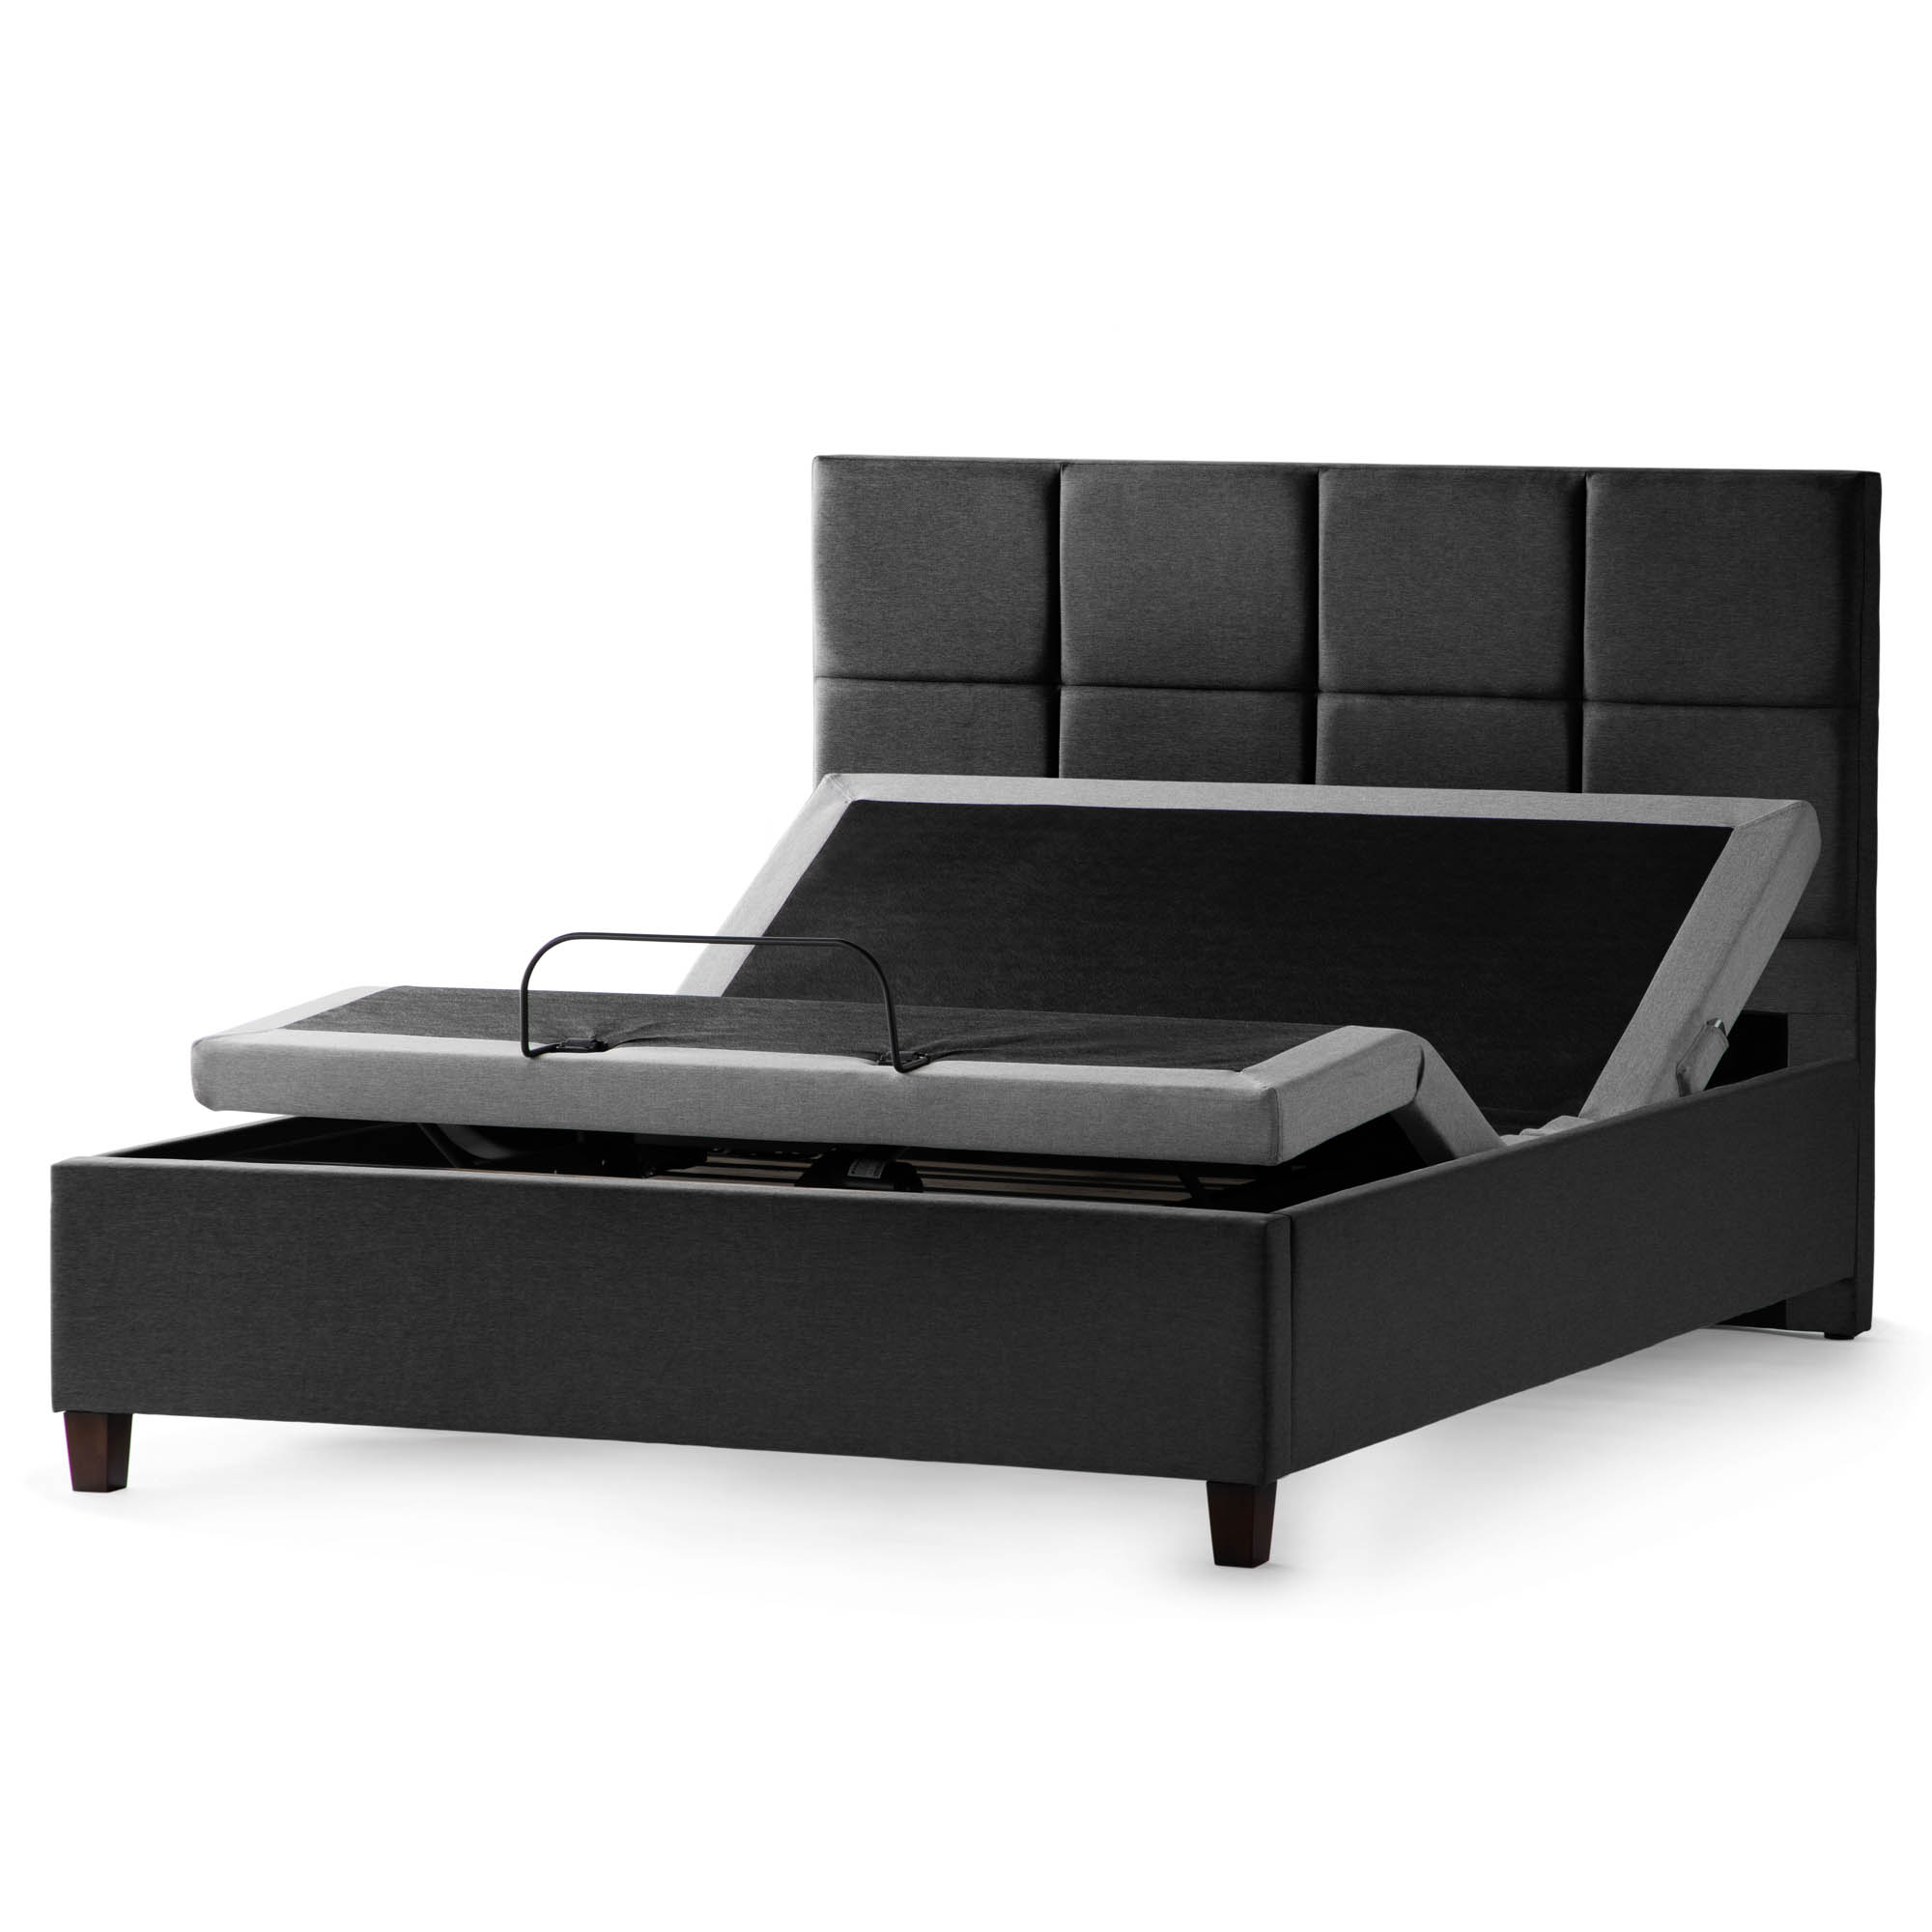 Malouf Scoresby Designer Bed Midwest, Tufted Lounge Reversible Twin Bed Black